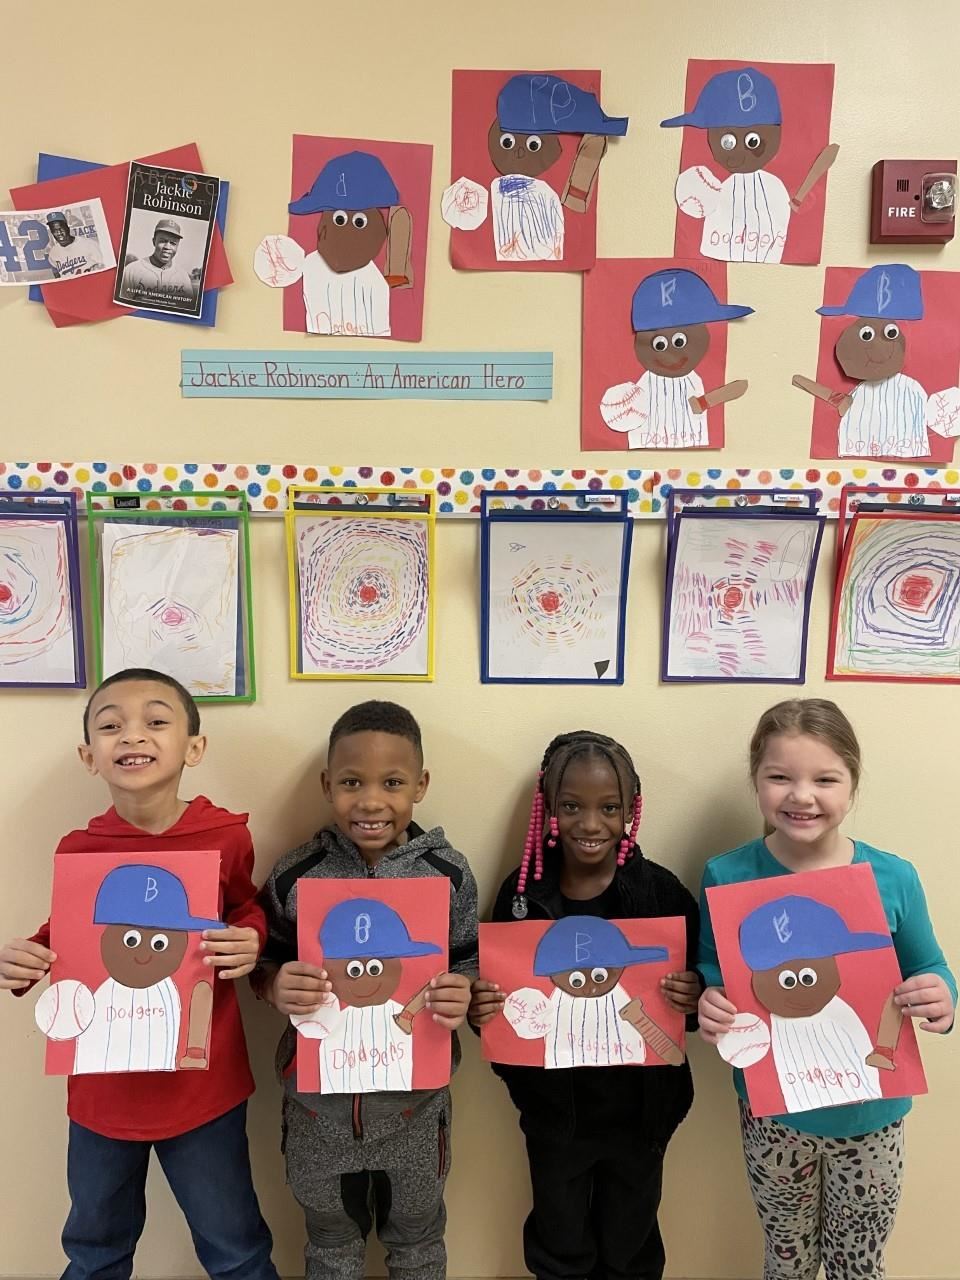 Smiling students lined up against a wall holding construction paper projects with the image of Jackie Robinson.